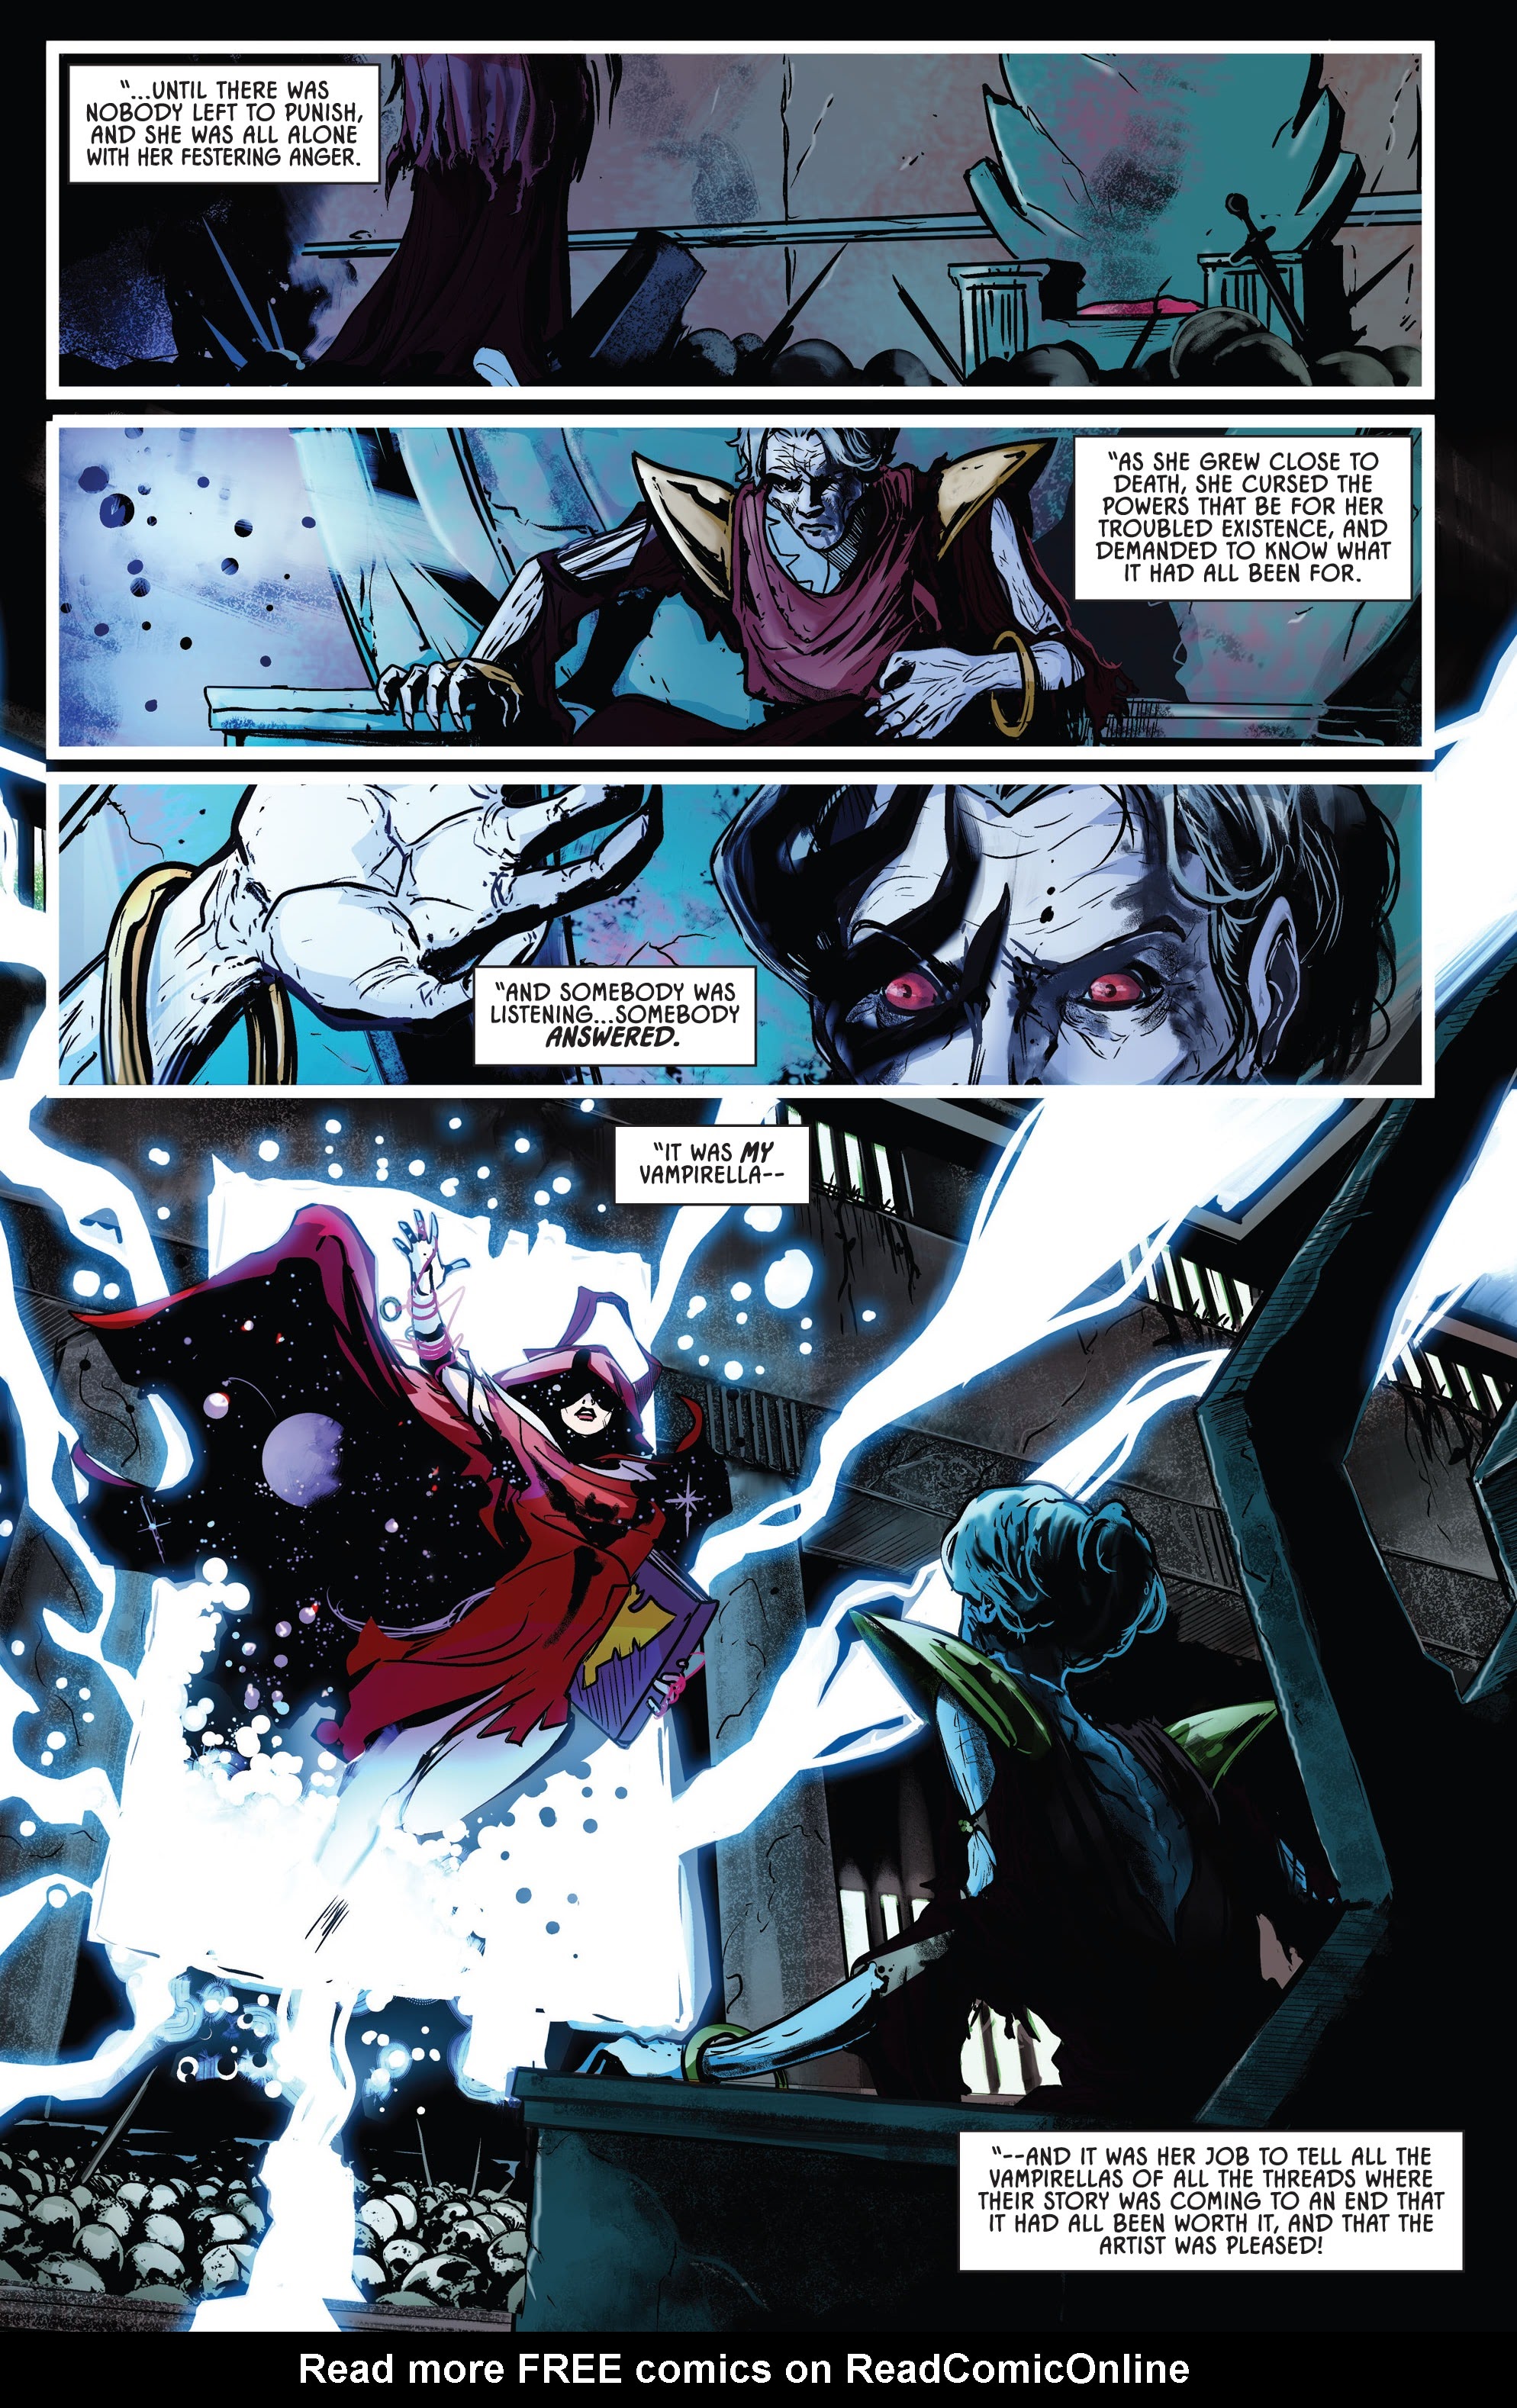 Read online Vampiverse comic -  Issue #2 - 8